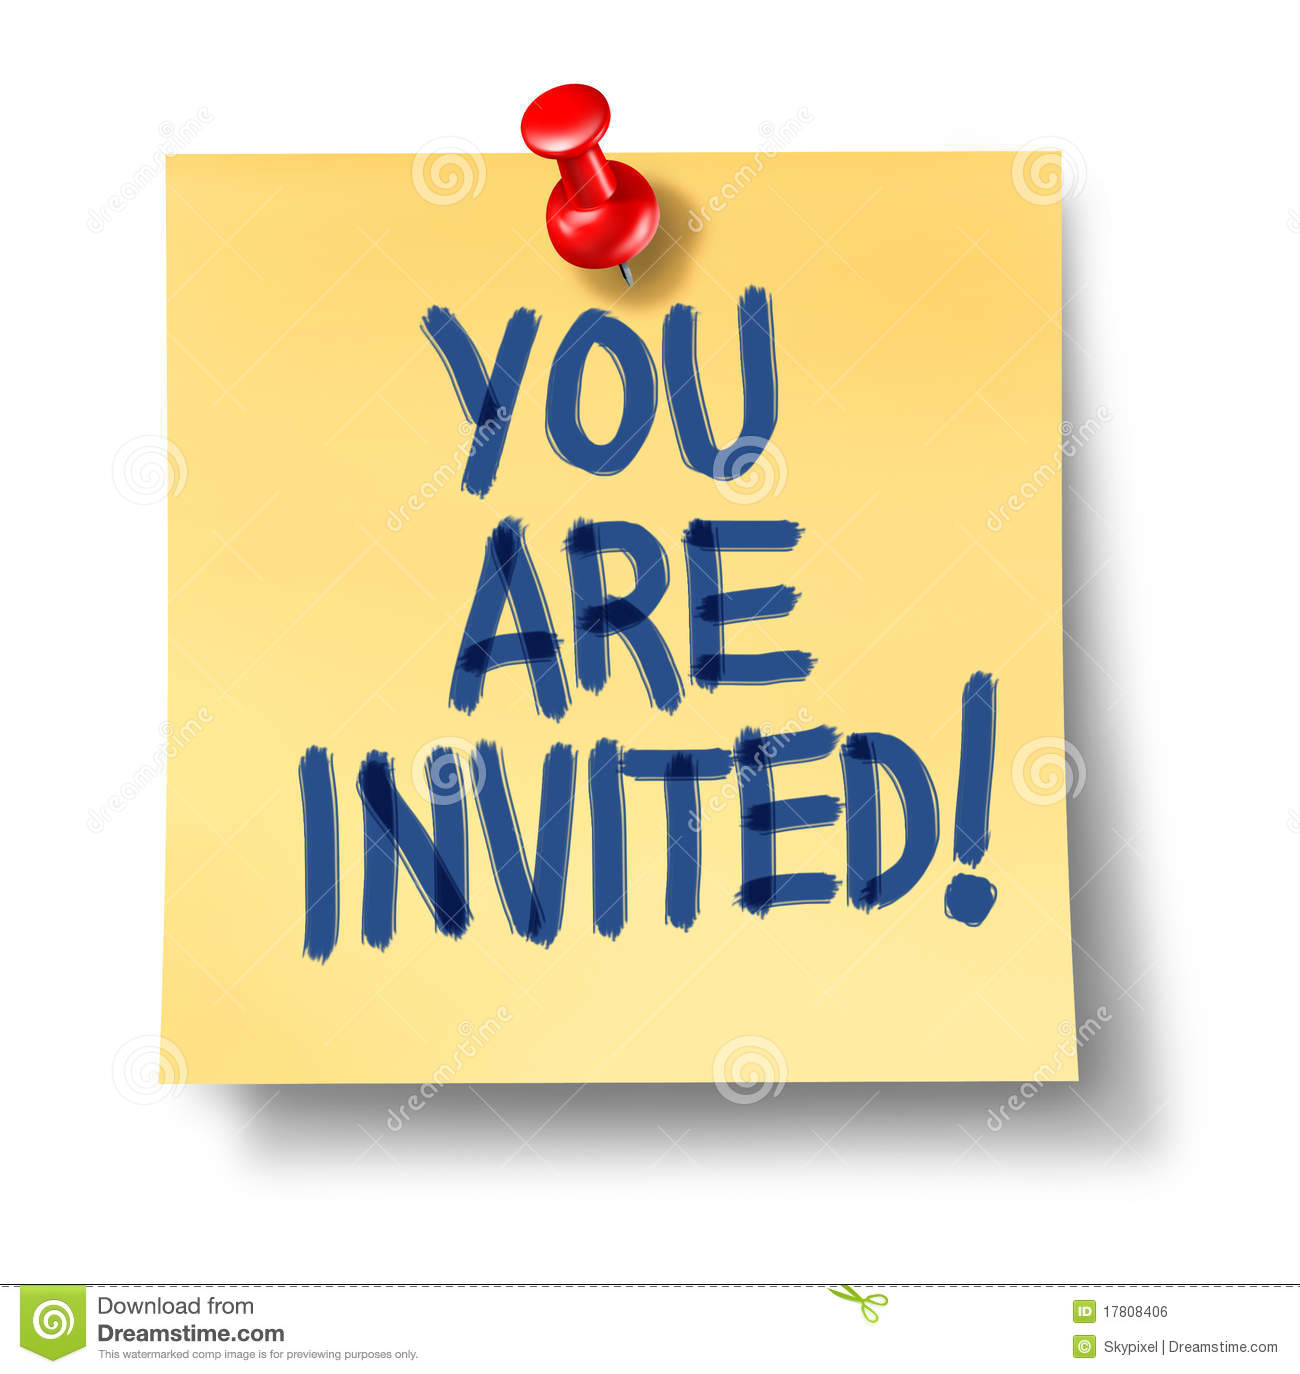 You Are Invited Office Note Yellow Paper Royalty Free Stock Image